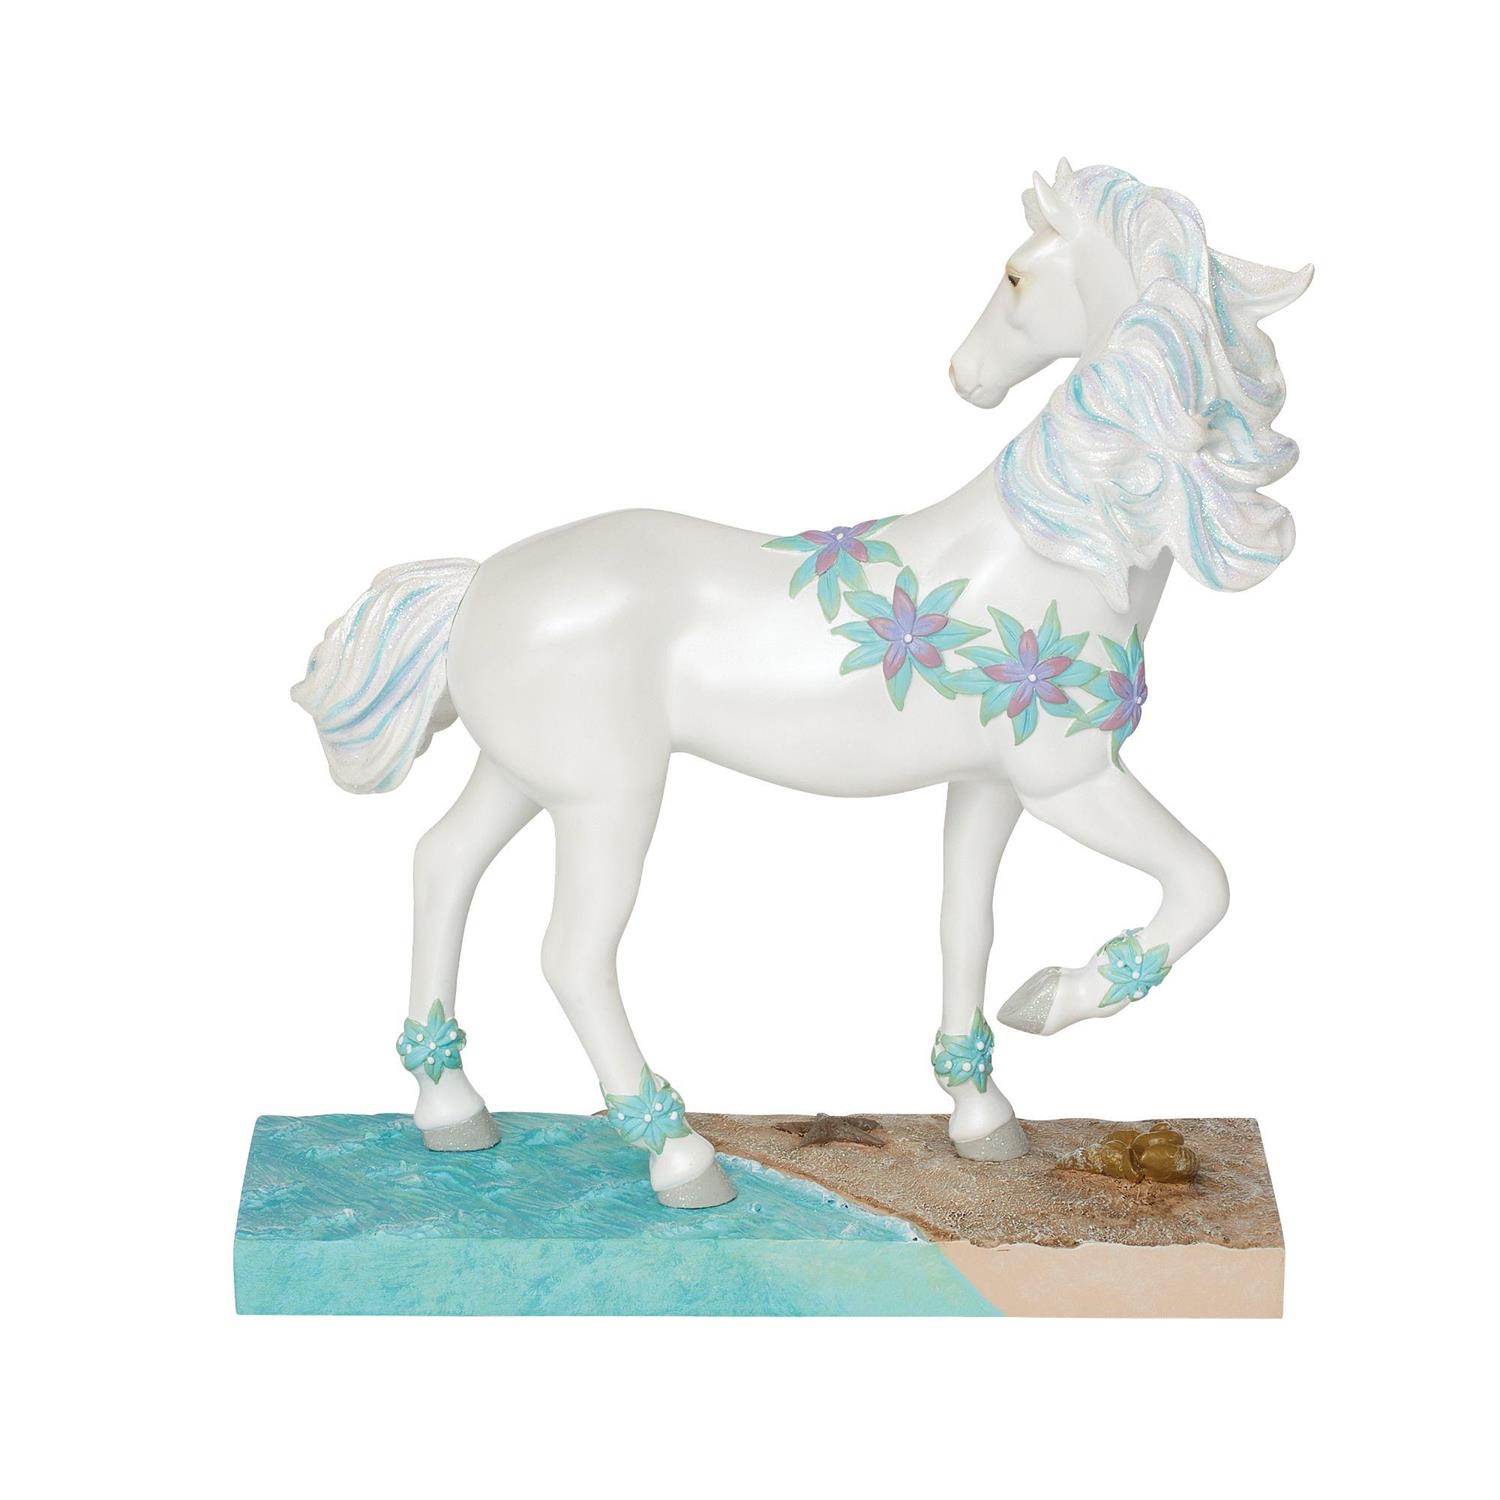 Enesco Gifts Trail Of Painted Ponies Artist Kathleen Longueil Ocean Dream Horse Figurine Free Shipping